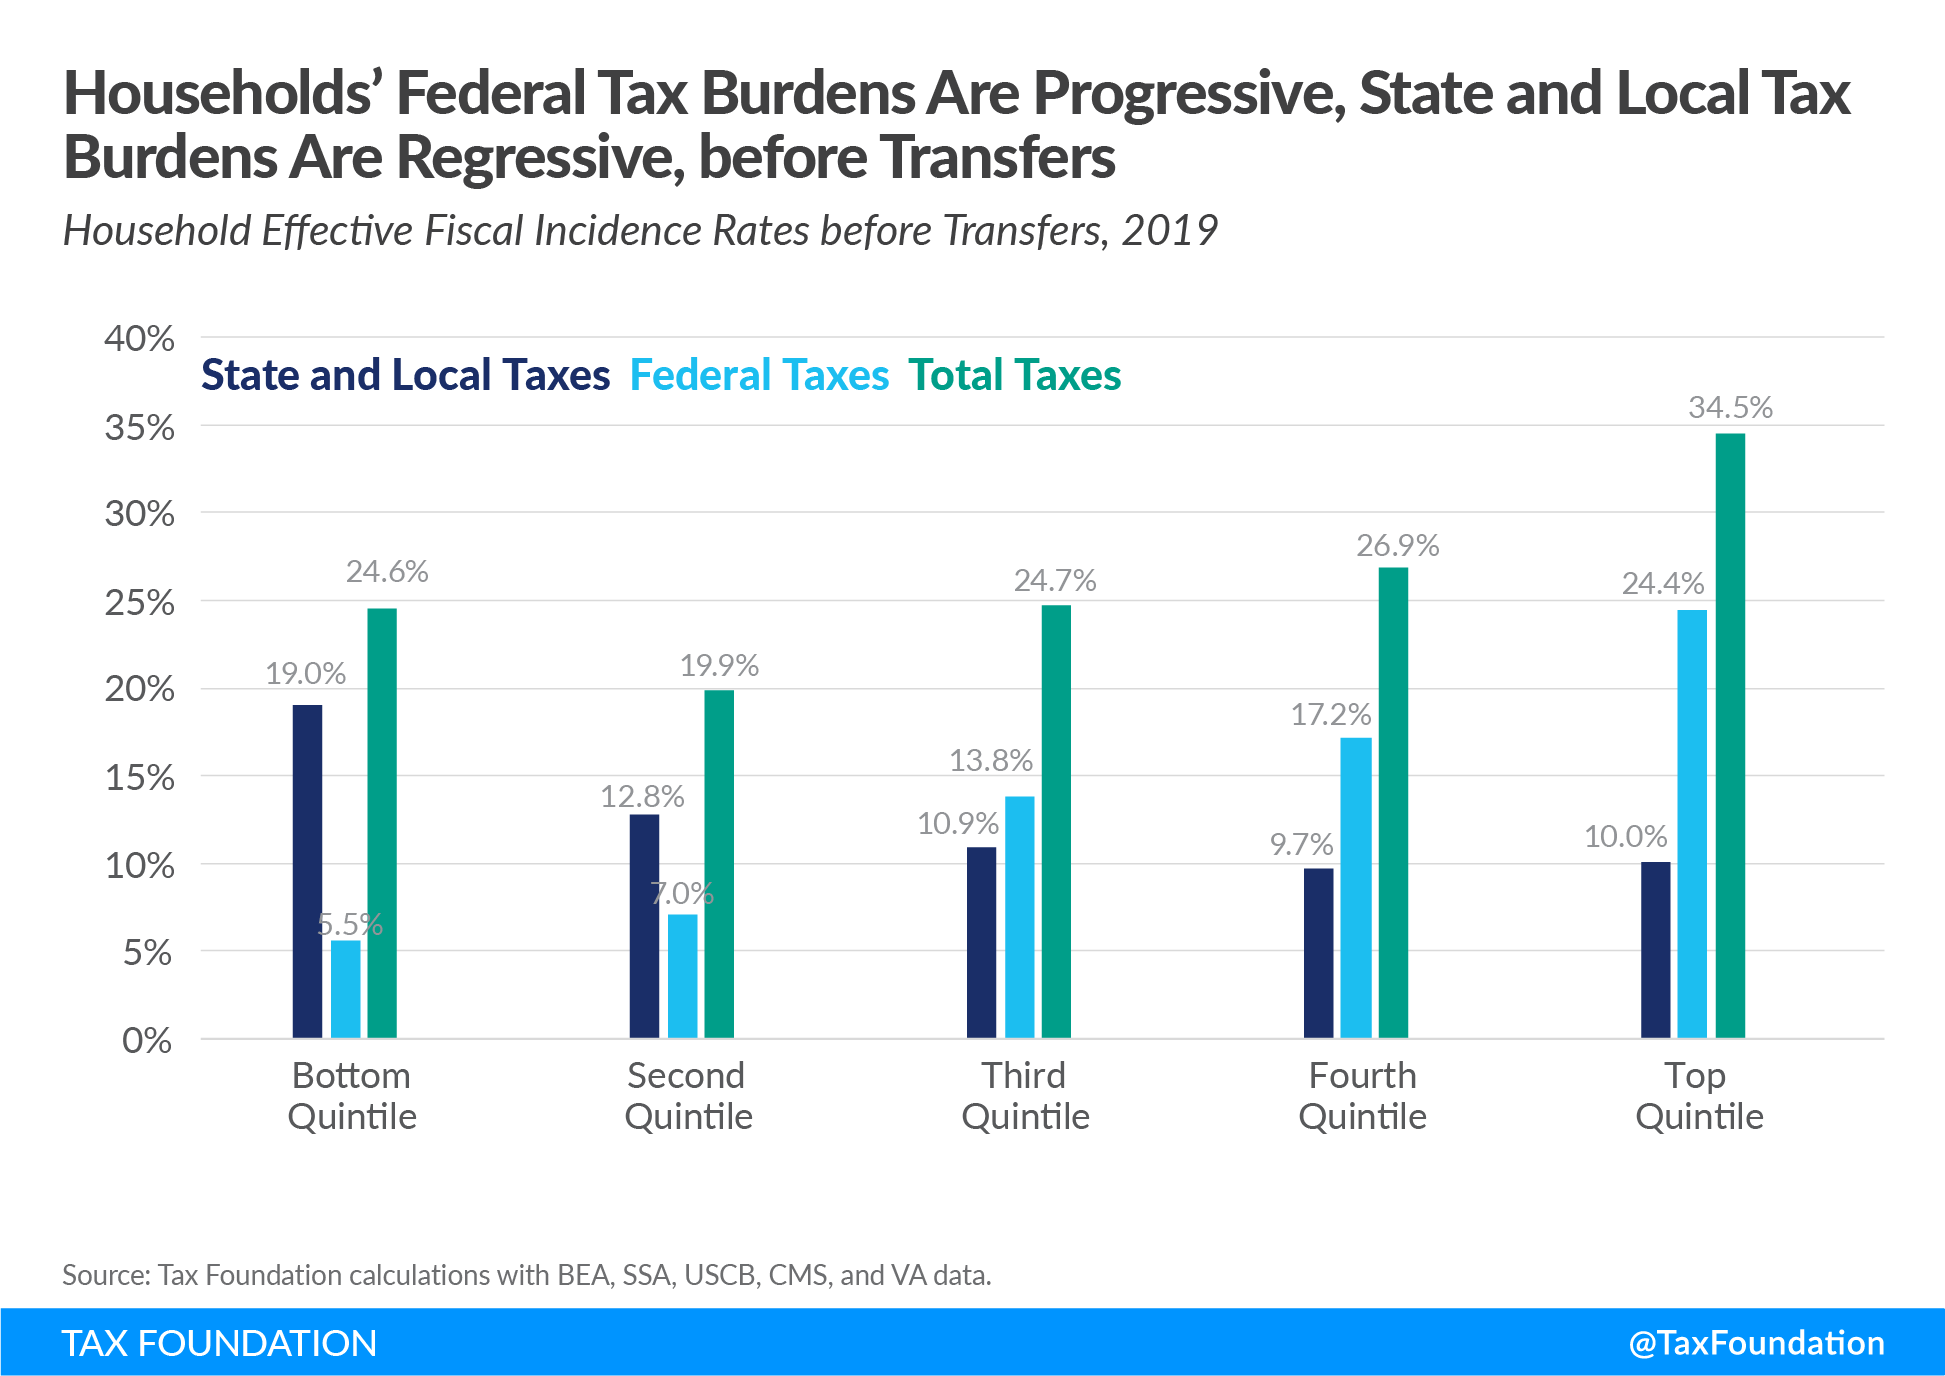 US federal tax burden progressive but state and local tax burden is regressive before government transfers